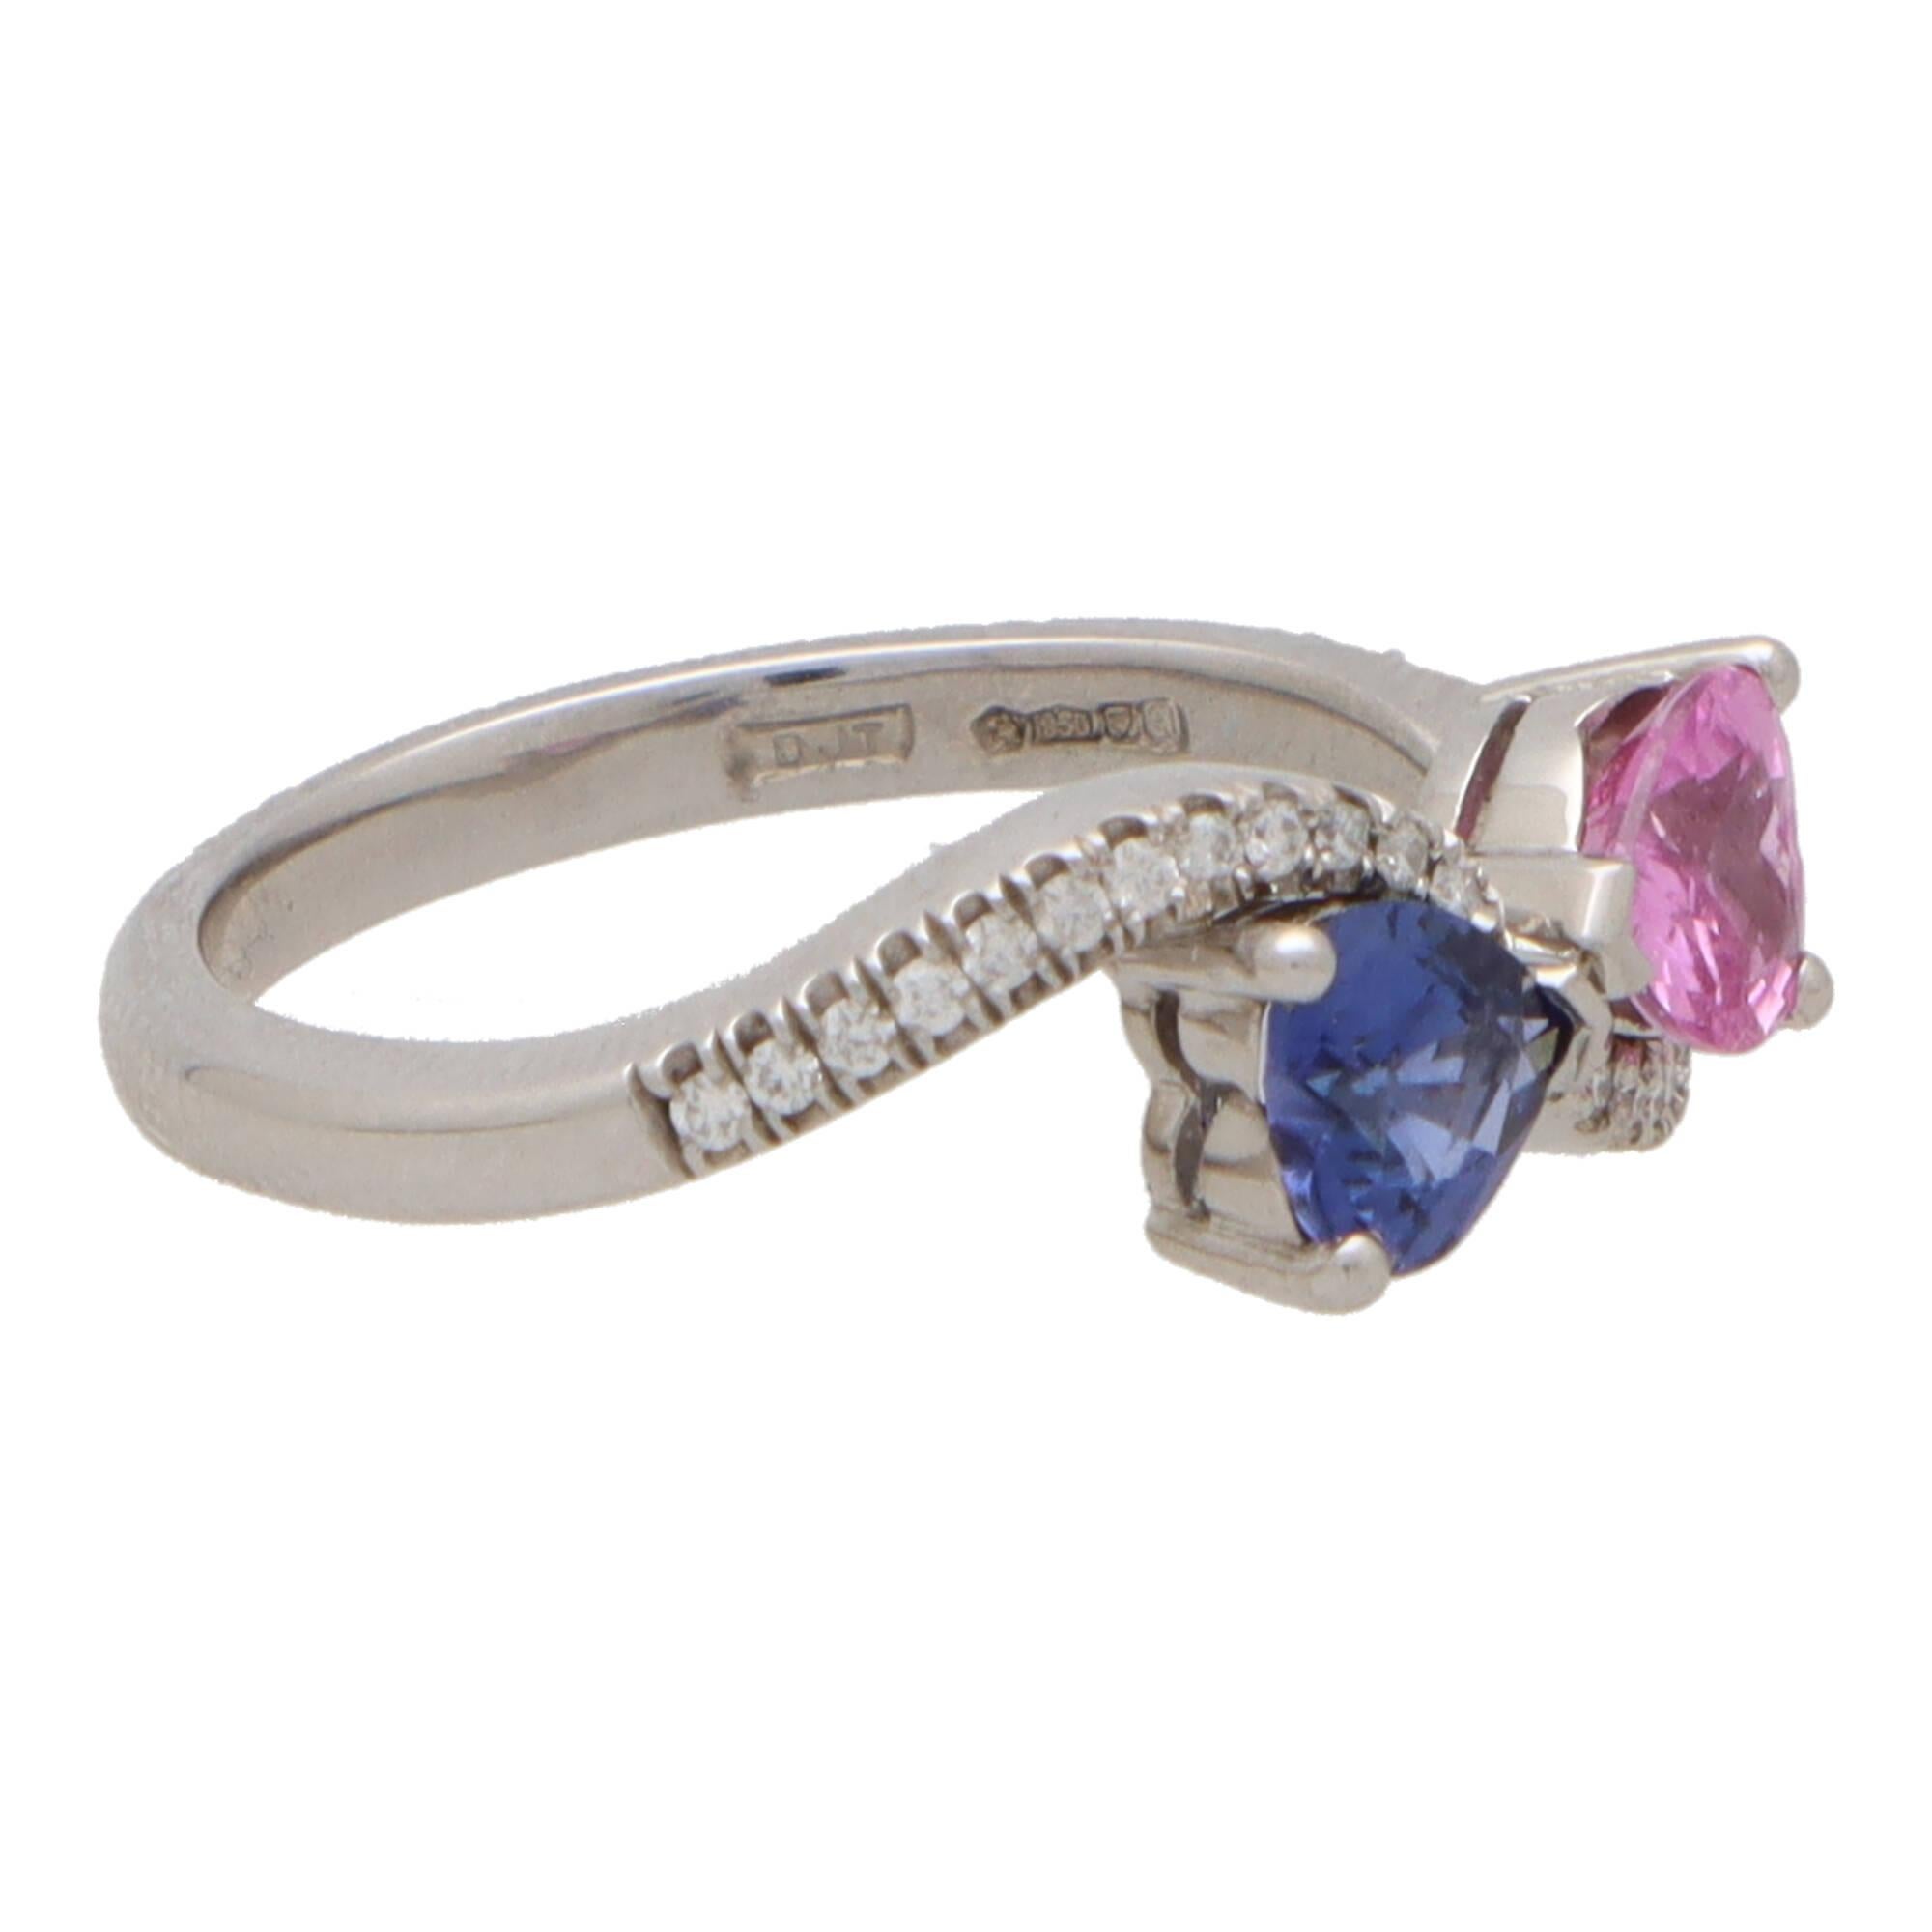 A unique pink and blue sapphire toi-et-moi crossover ring set in 18k white gold.

The phrase ‘toi-et-moi’ simply means ‘me and you’ and is famously known for being one of the most romantic ring designs in the jewellery industry. A classic toi-et-moi